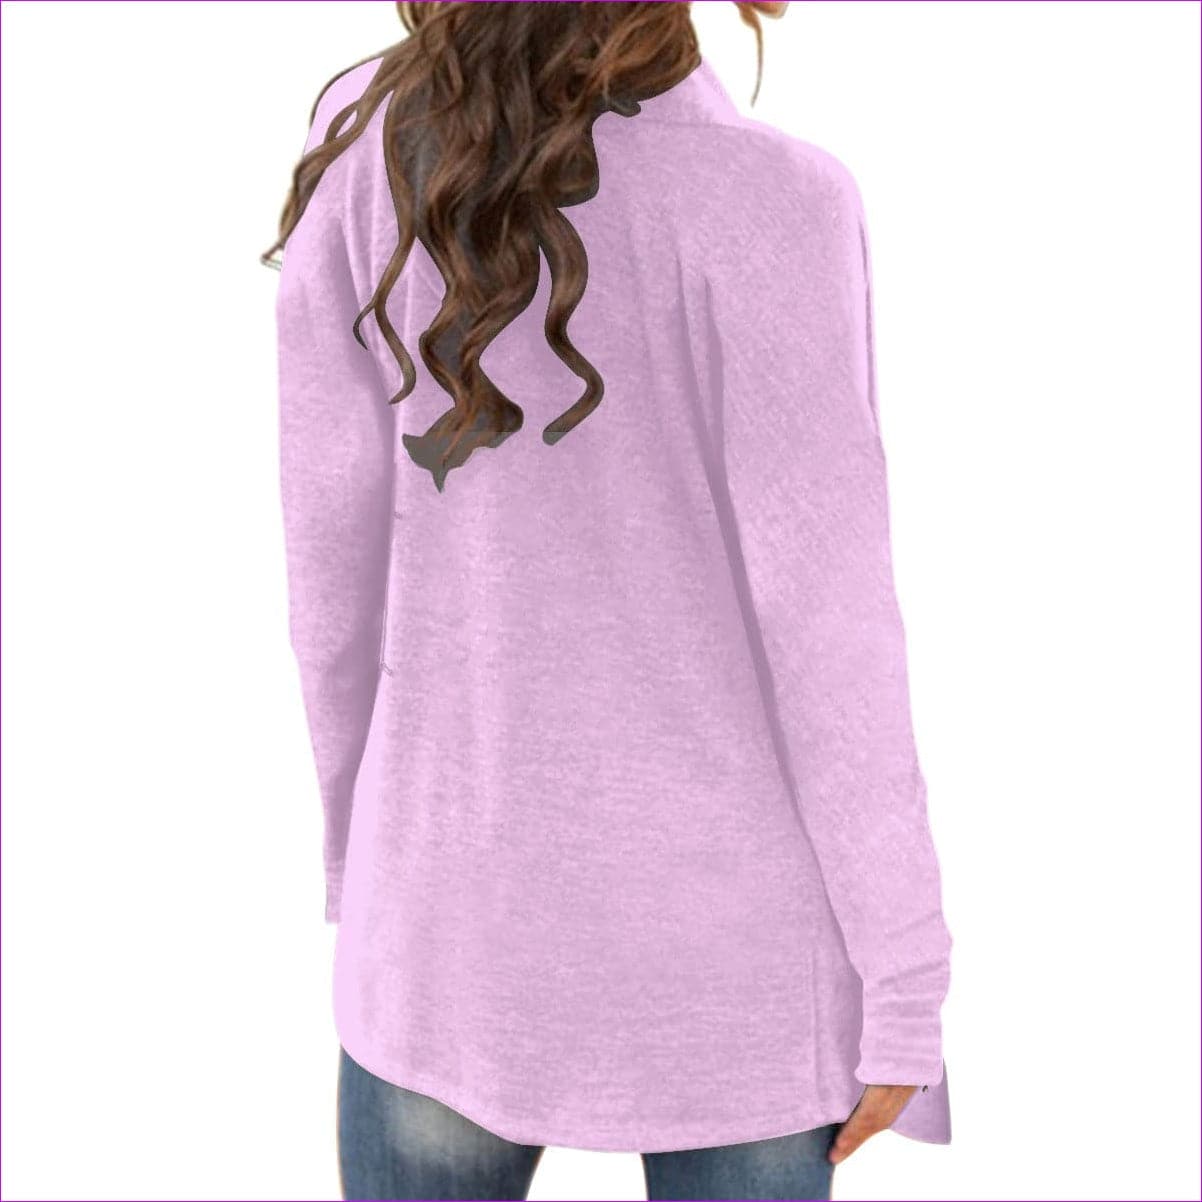 Red Rose Purp Women's Cardigan With Long Sleeve - women's cardigan at TFC&H Co.